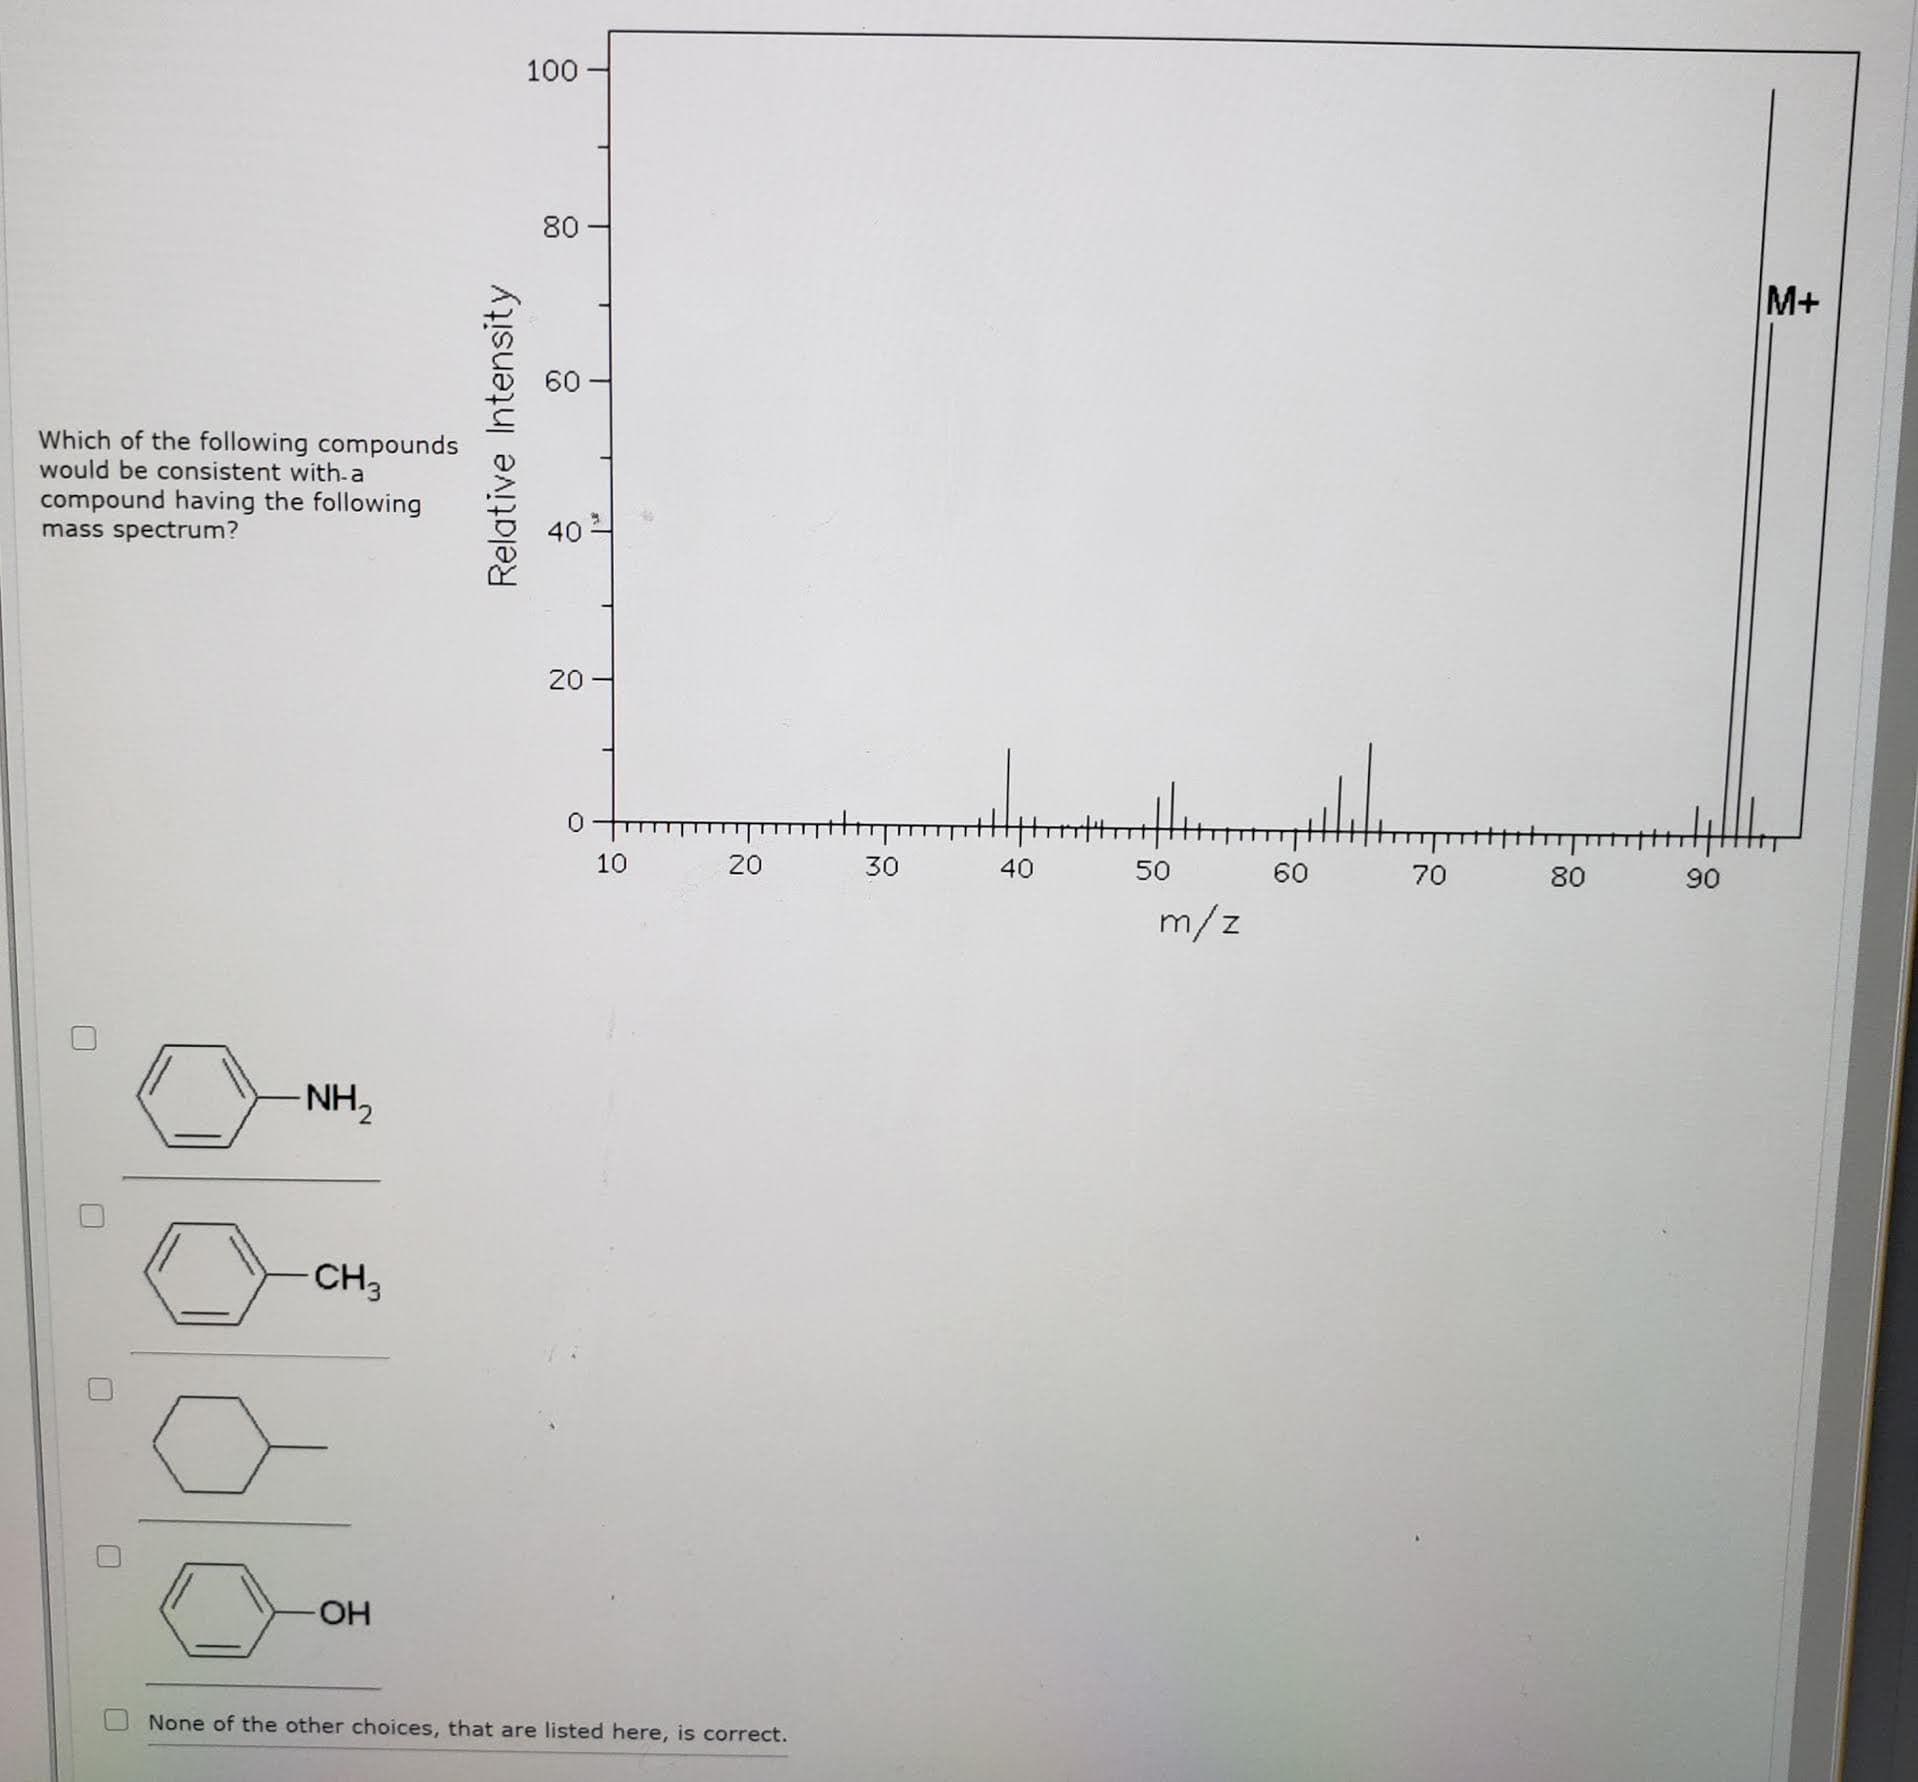 100
80
M+
60
Which of the following compounds
would be consistent with-a
compound having the following
mass spectrum?
ulu
80
10
20
30
40
50
60
70
90
m/z
NH2
CH3
HO-
None of the other choices, that are listed here, is correct.
40
20
Relative Intensity
